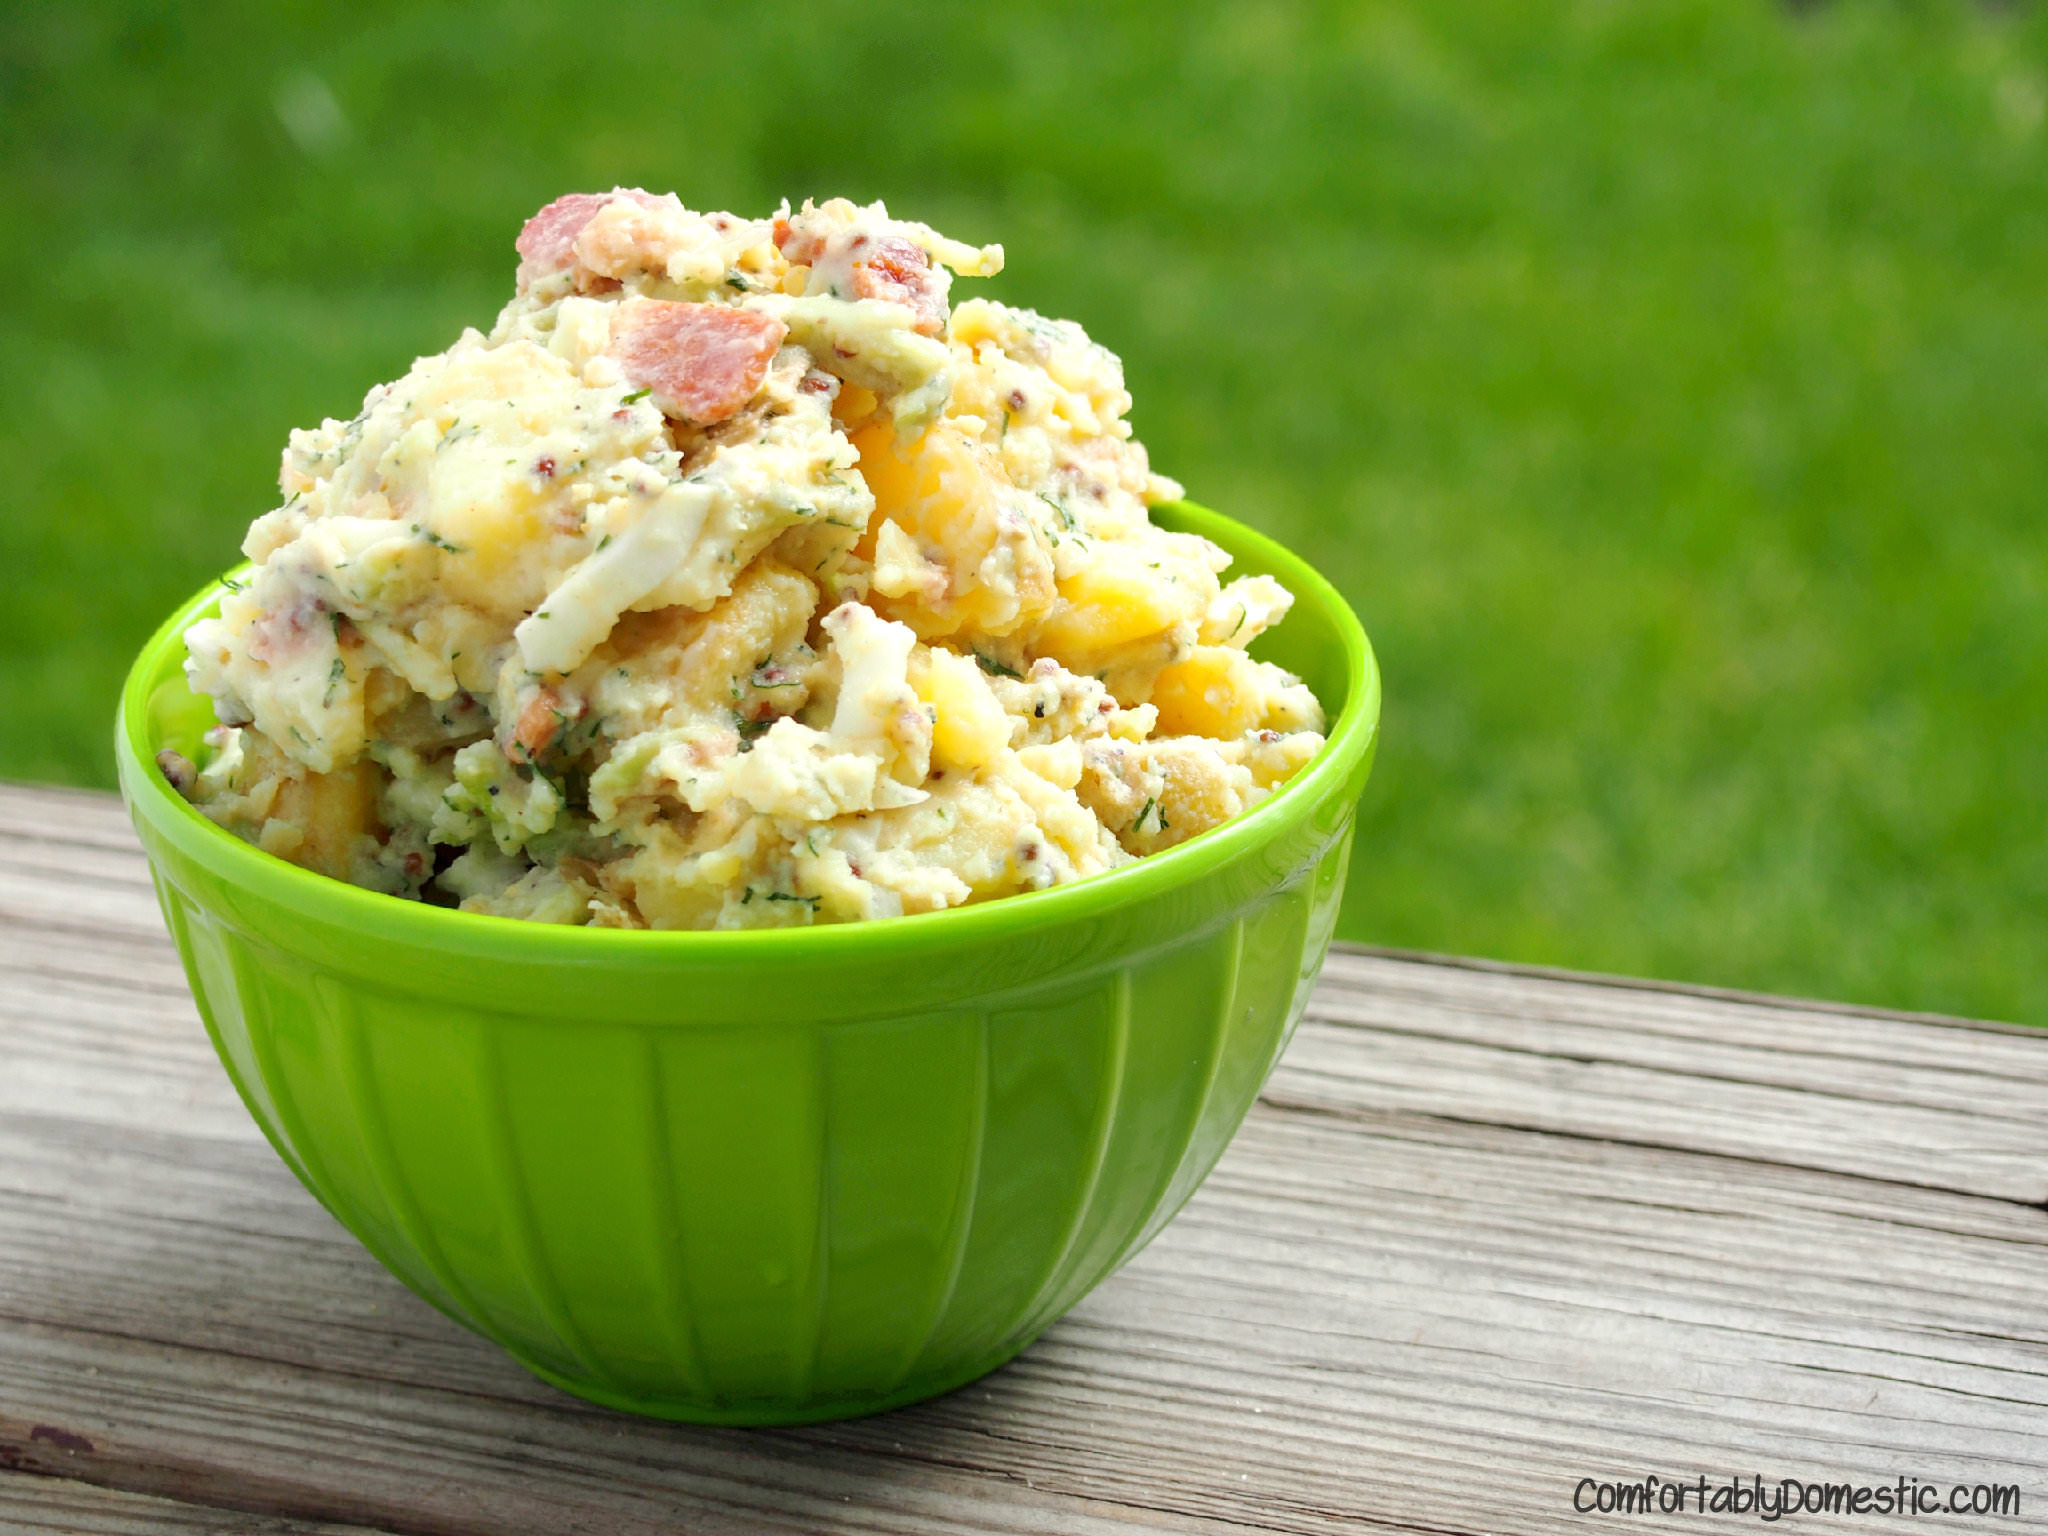 Creamy yellow potatoes are the base for dill potato salad, a lightened up version of classic potato salad, made with bacon, eggs, and plenty of fresh dill. | ComfortablyDomestic.com